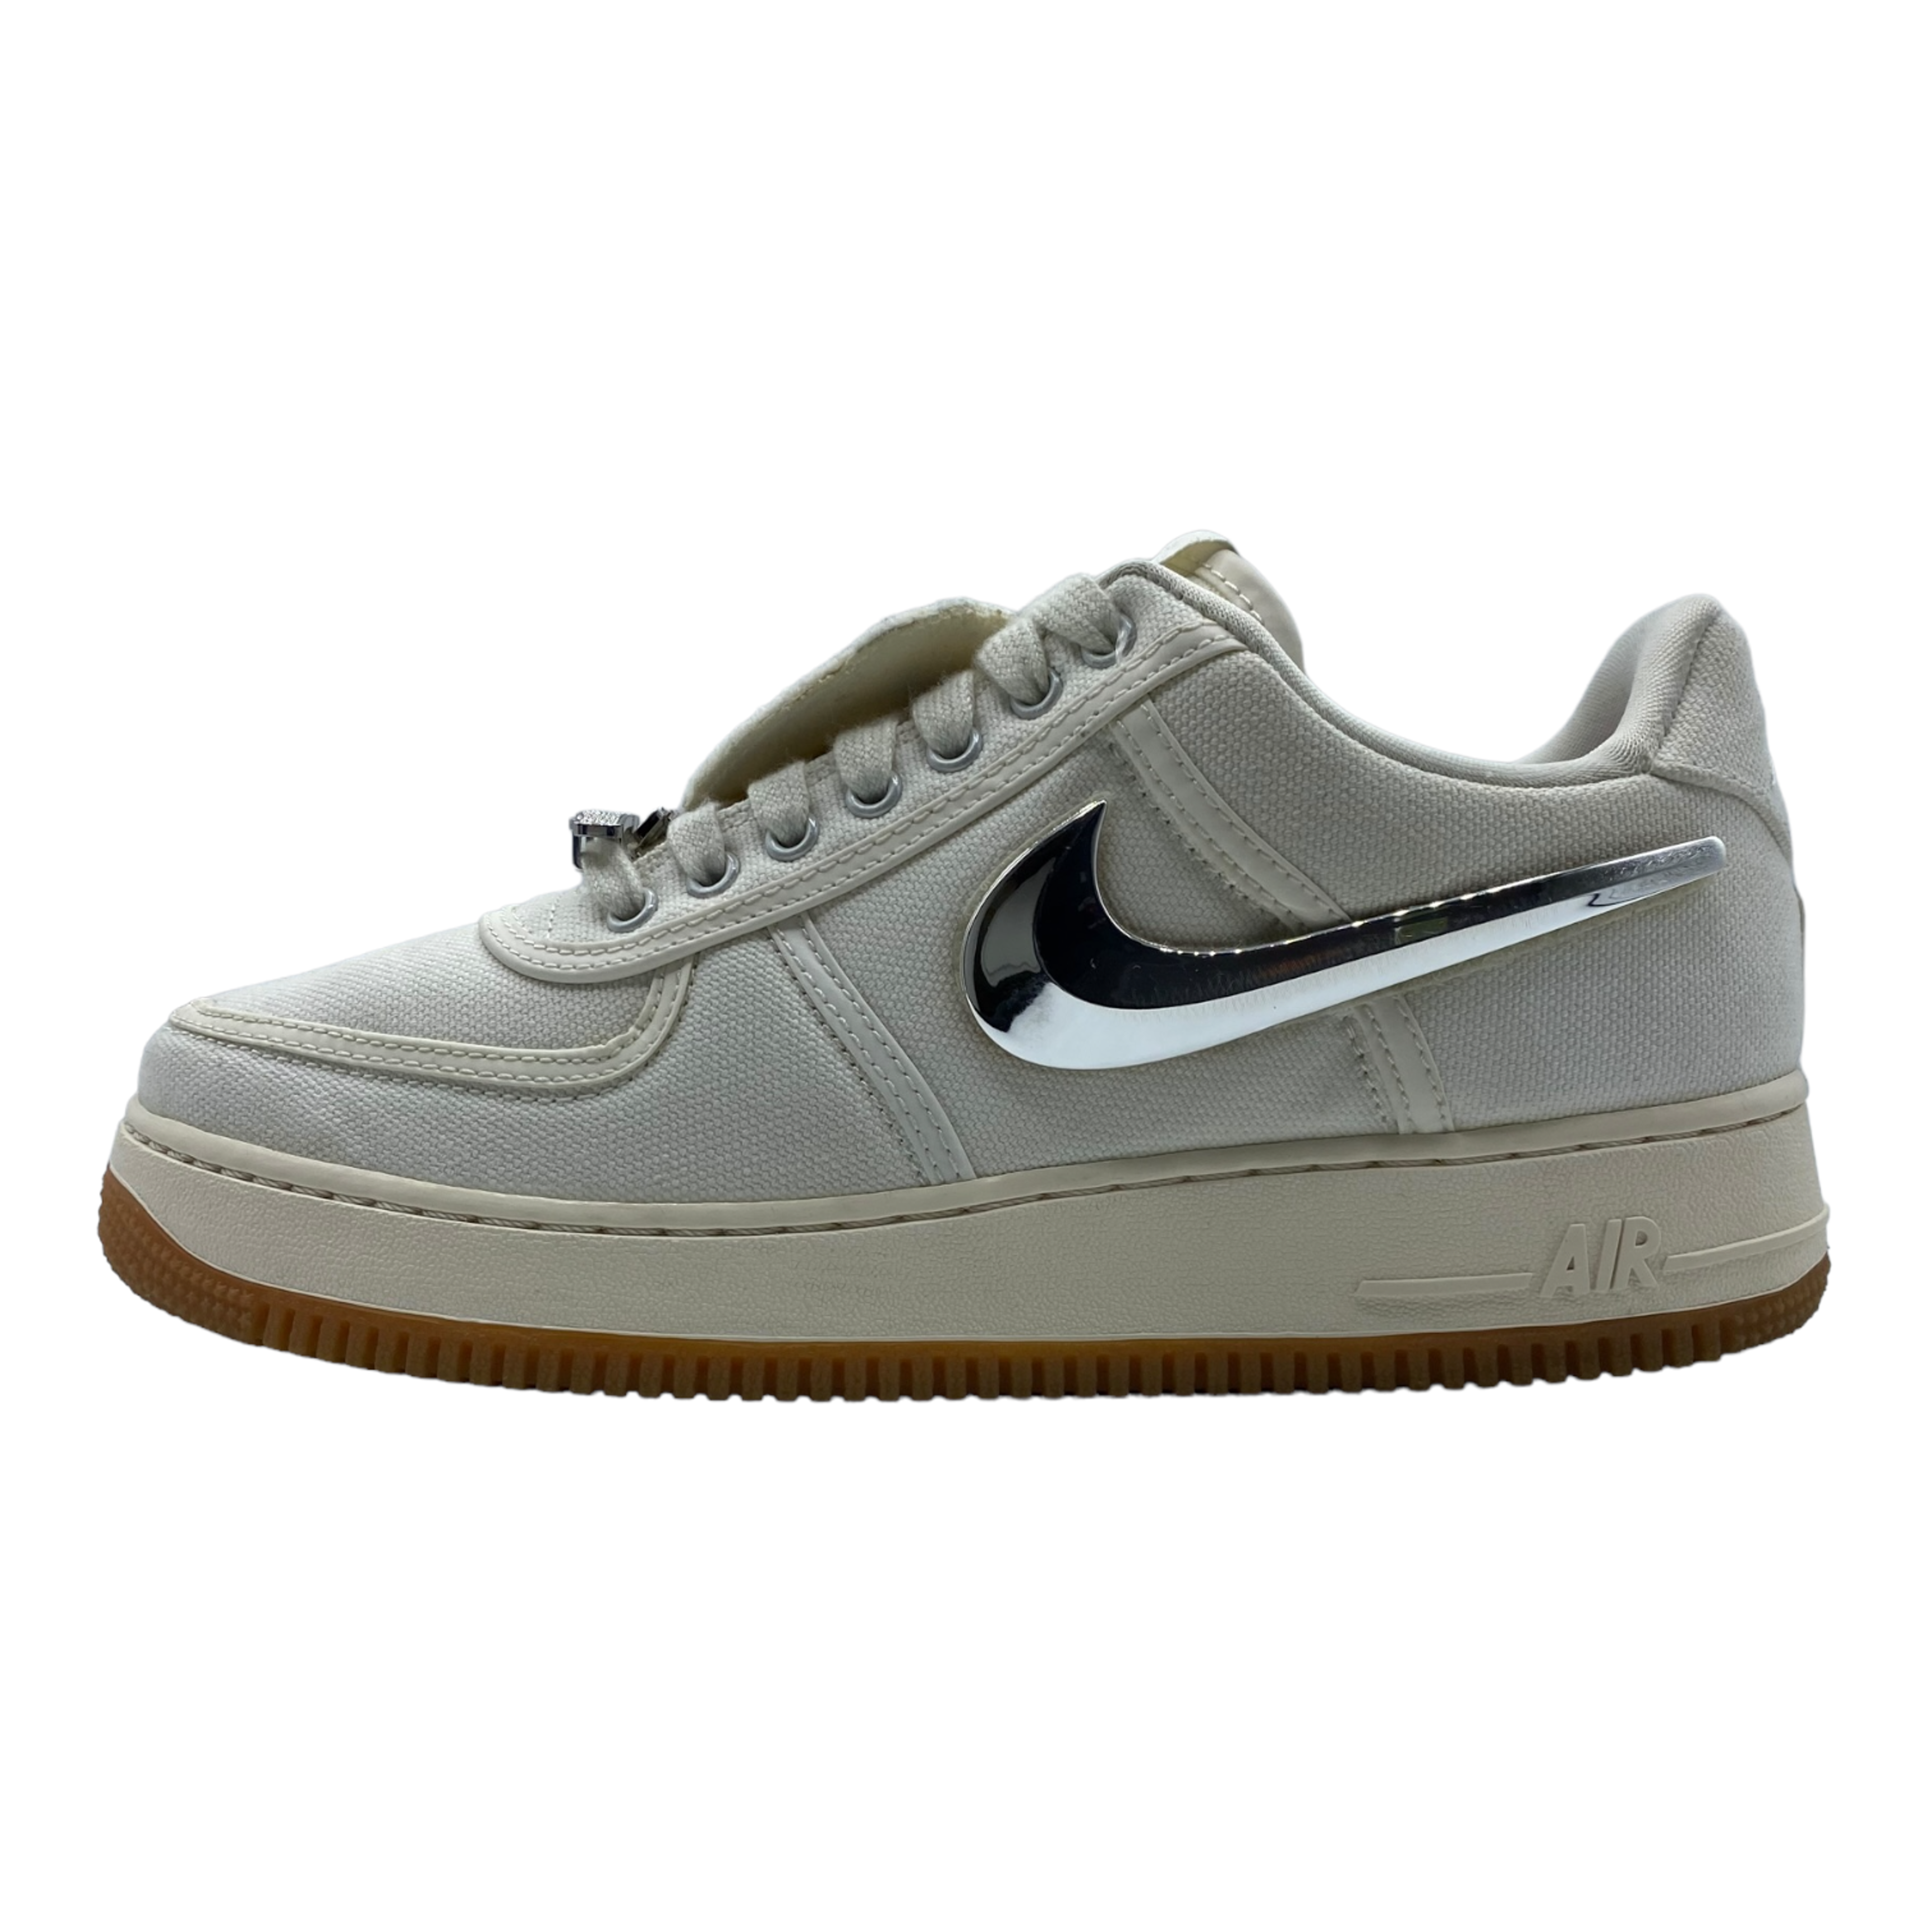 Alternate View 1 of Nike Air Force 1 Low Travis Scott Sail Pre-Owned